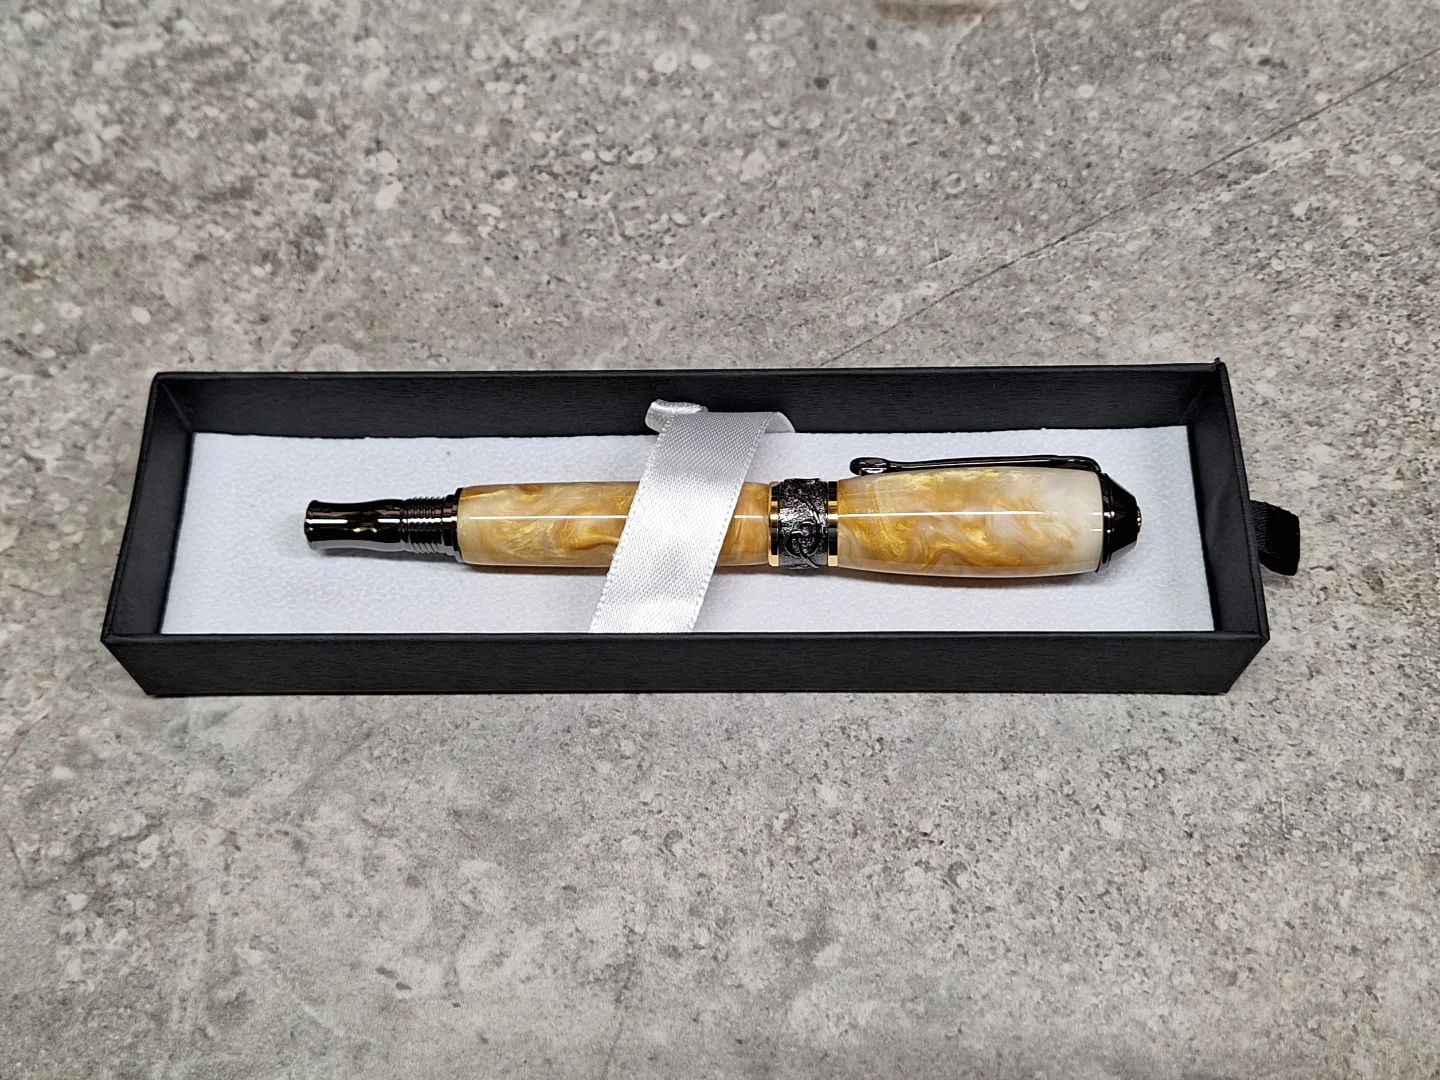 Fountain Pen I made a while ago, the reciever mad a whole stop motion set of pictures of unwrapping it which was wonderful! #fountain #fountainpen #pen #penmaking